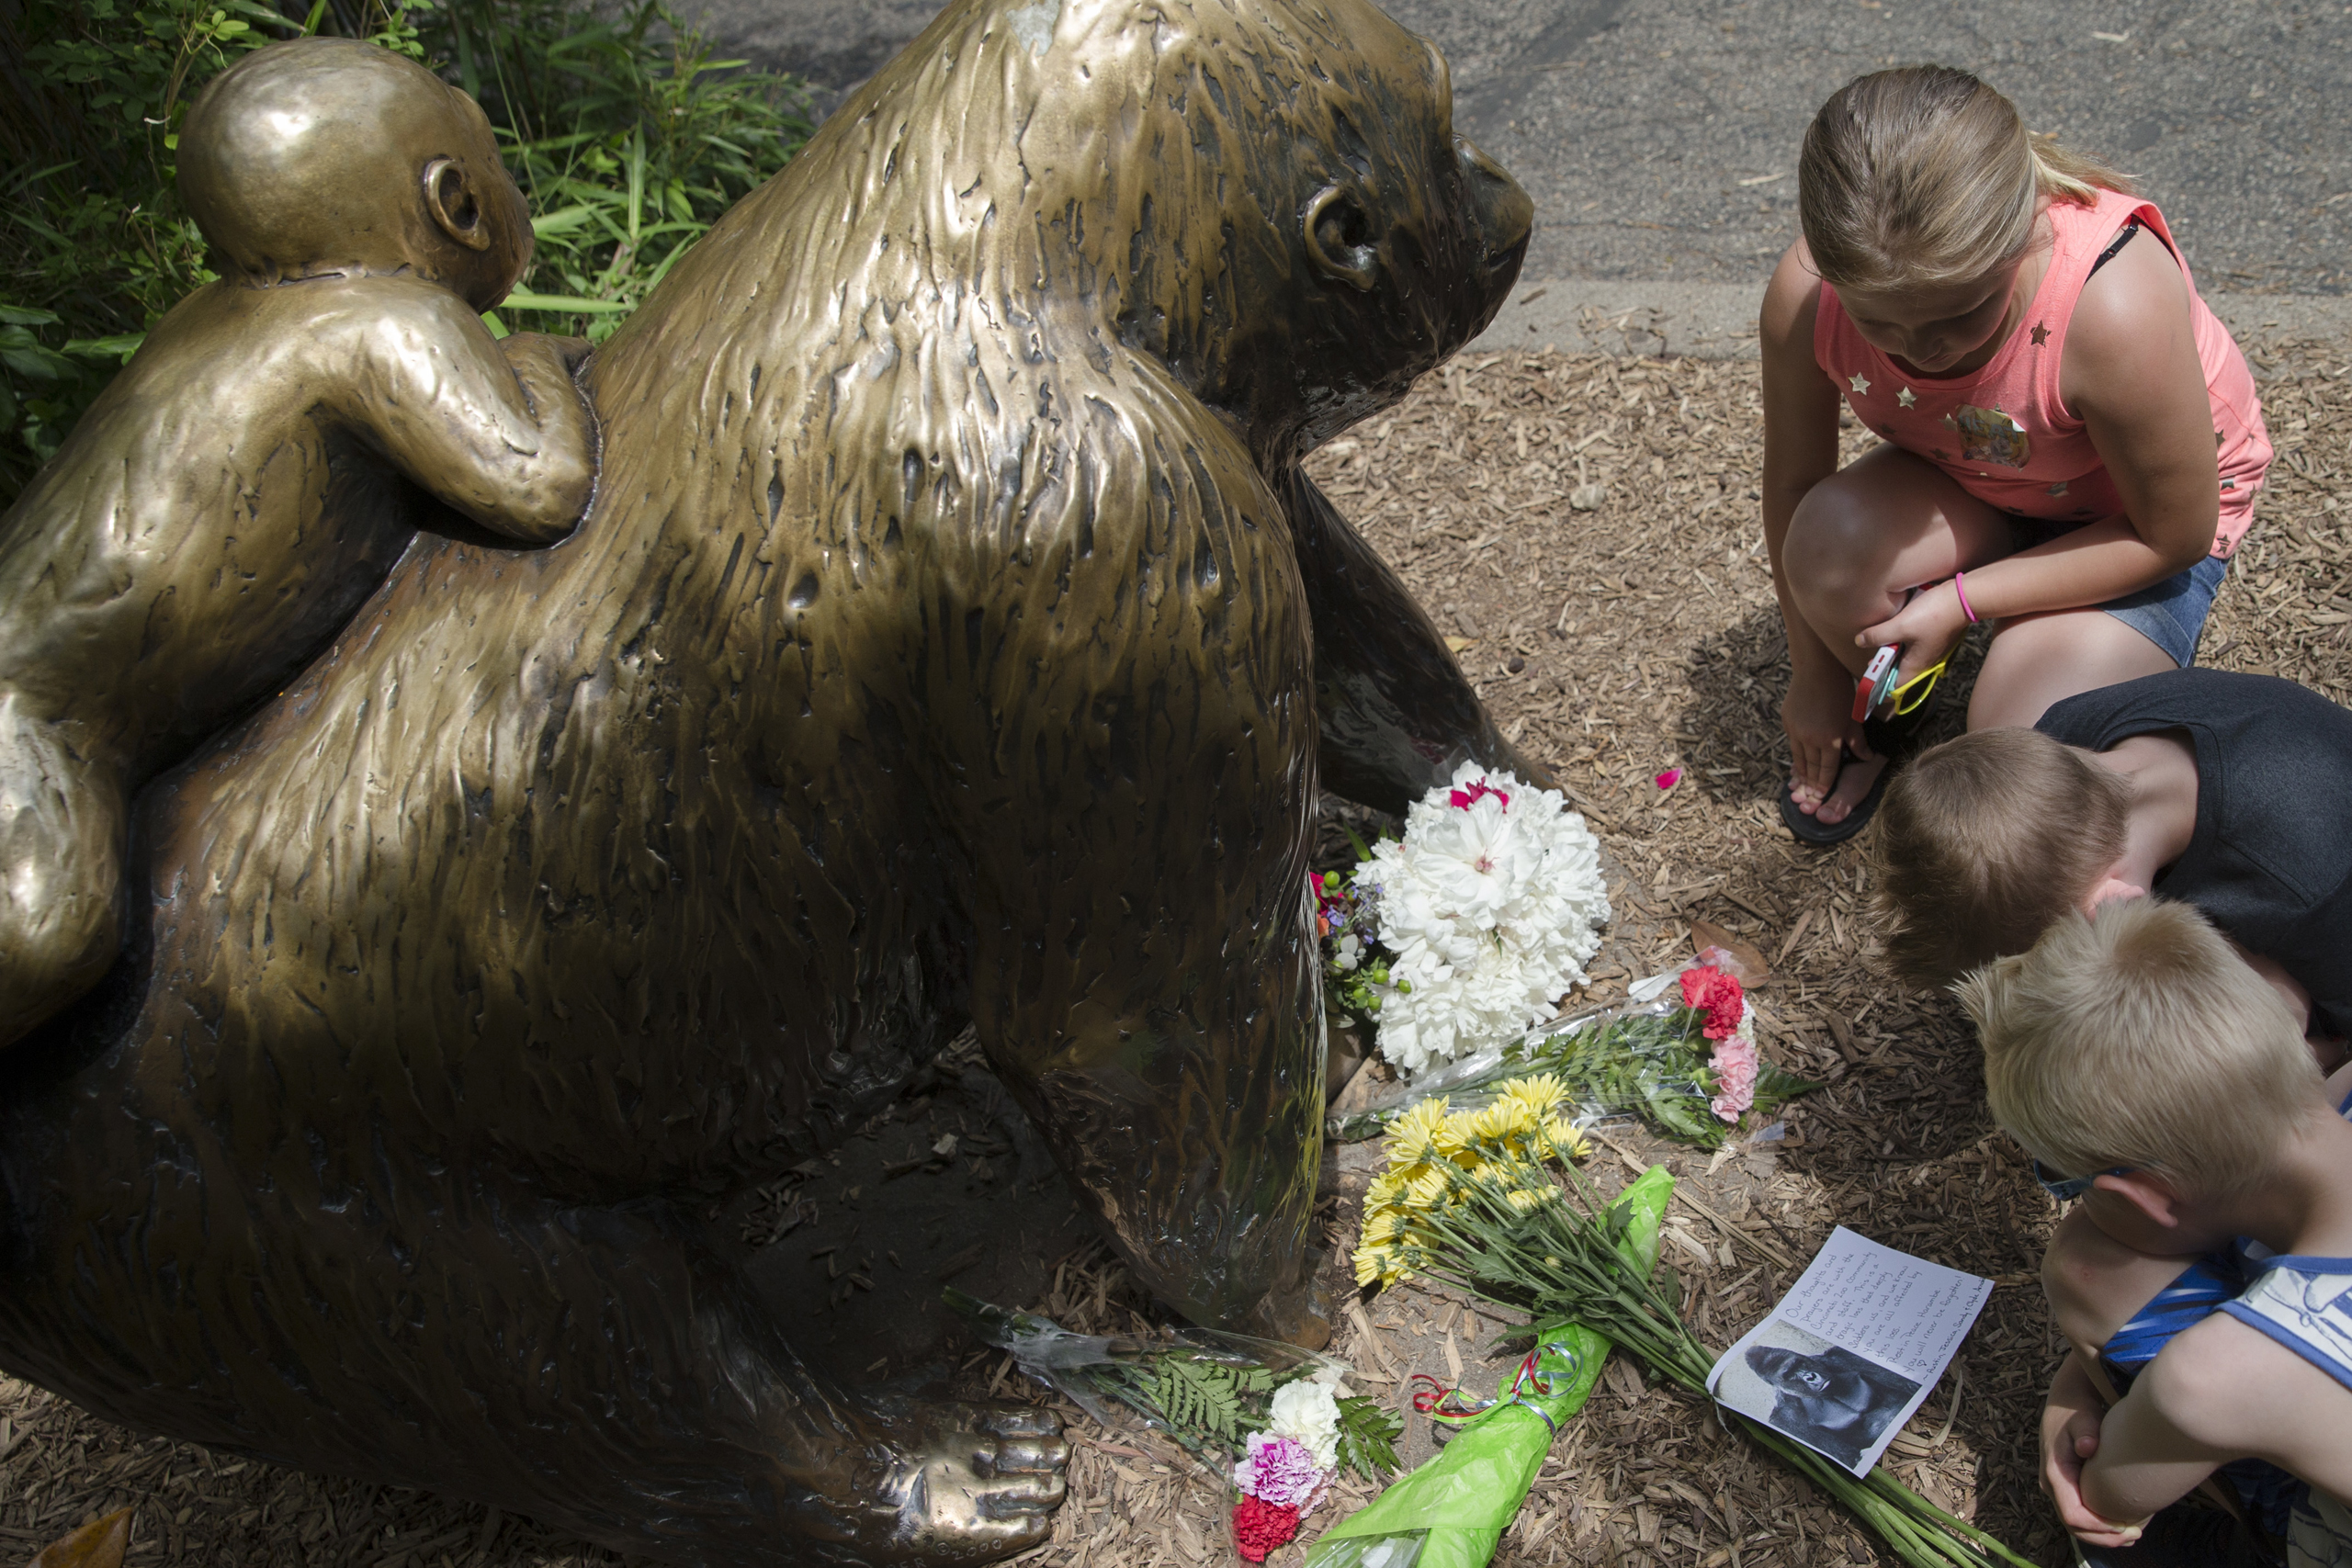 Children pause at the feet of a gorilla statue where flowers and a sympathy card have been placed, outside the Gorilla World exhibit at the Cincinnati Zoo &amp; Botanical Garden on May 29, 2016. (John Minchillo—AP)